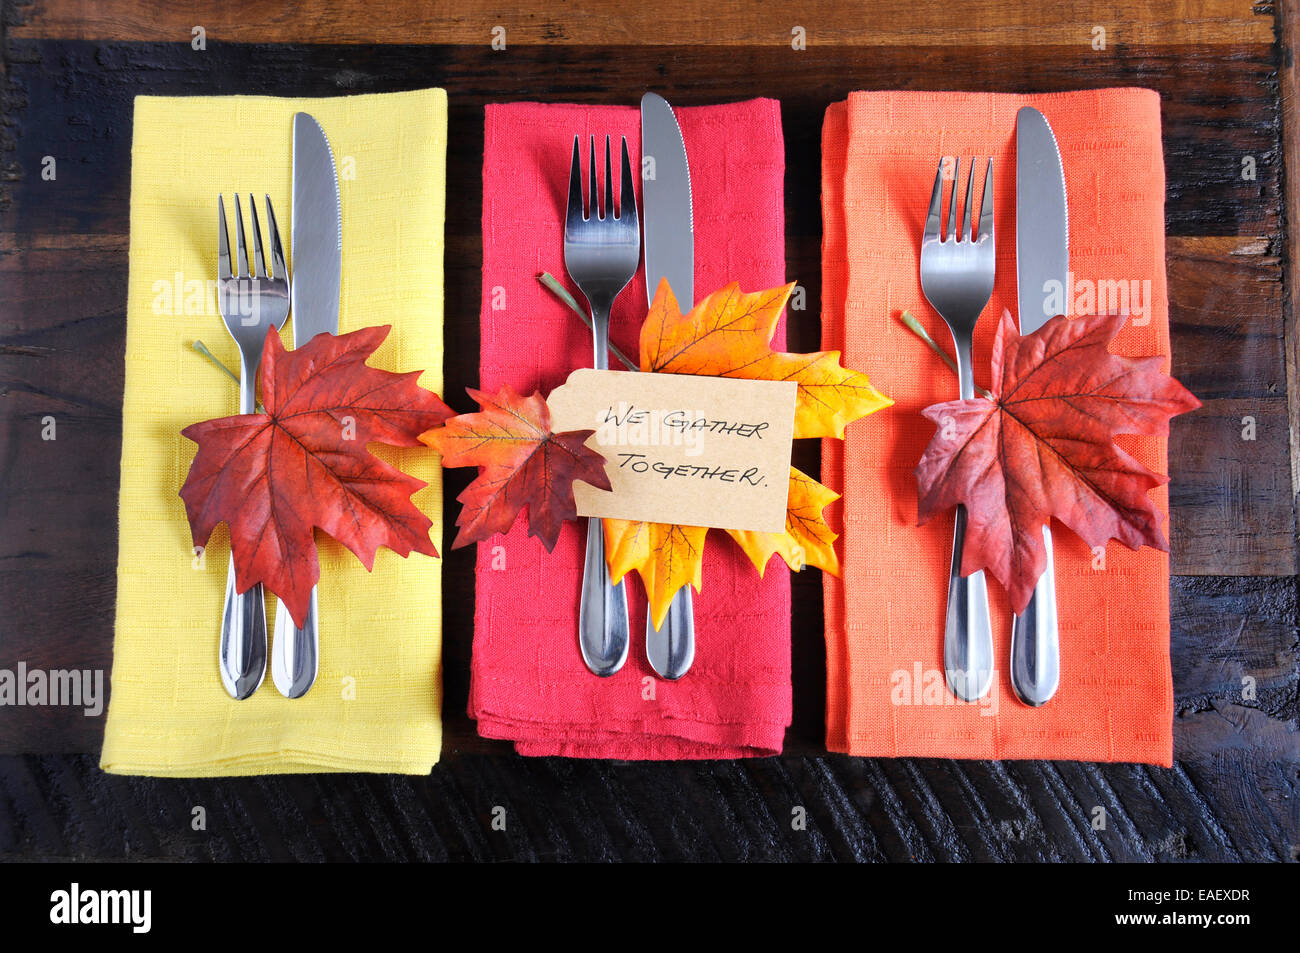 Happy Thanksgiving table place setting with We Gather Together place card and autumn fall leaf decorations Stock Photo